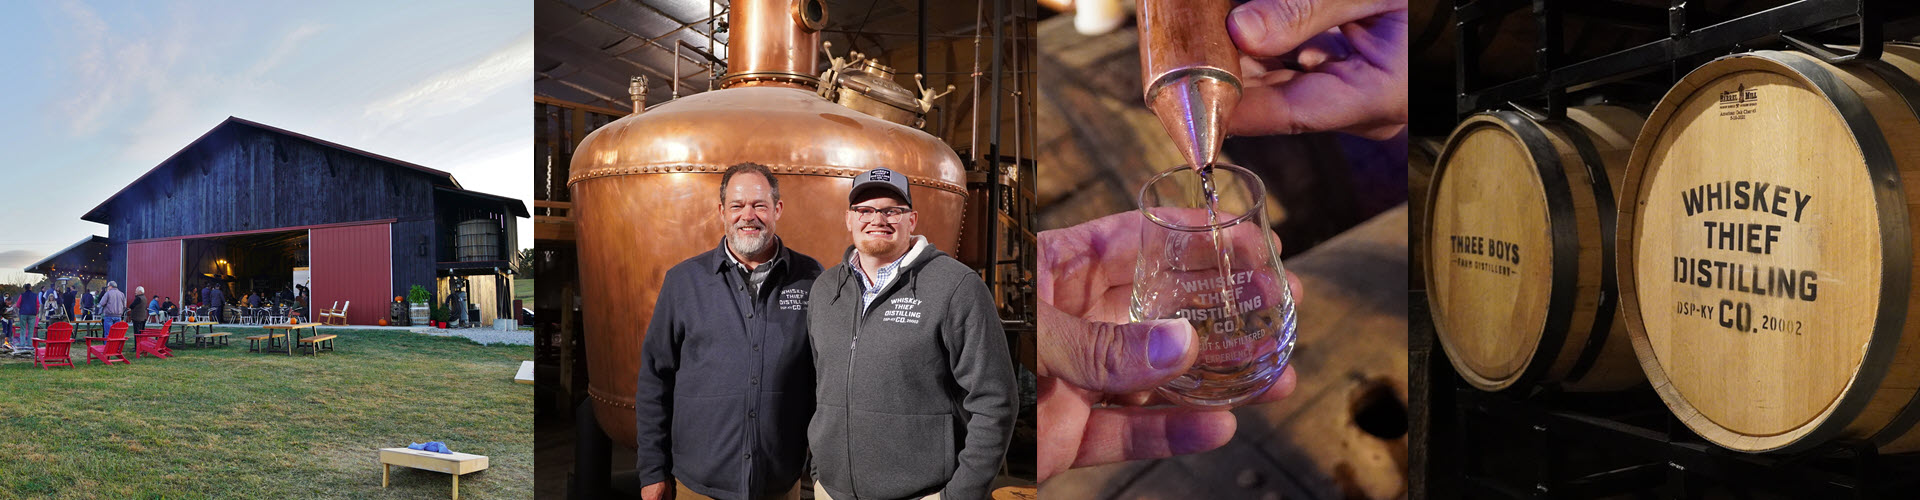 Whiskey Thief Distilling Co. - Thieving Bourbon Straight from the Barrel